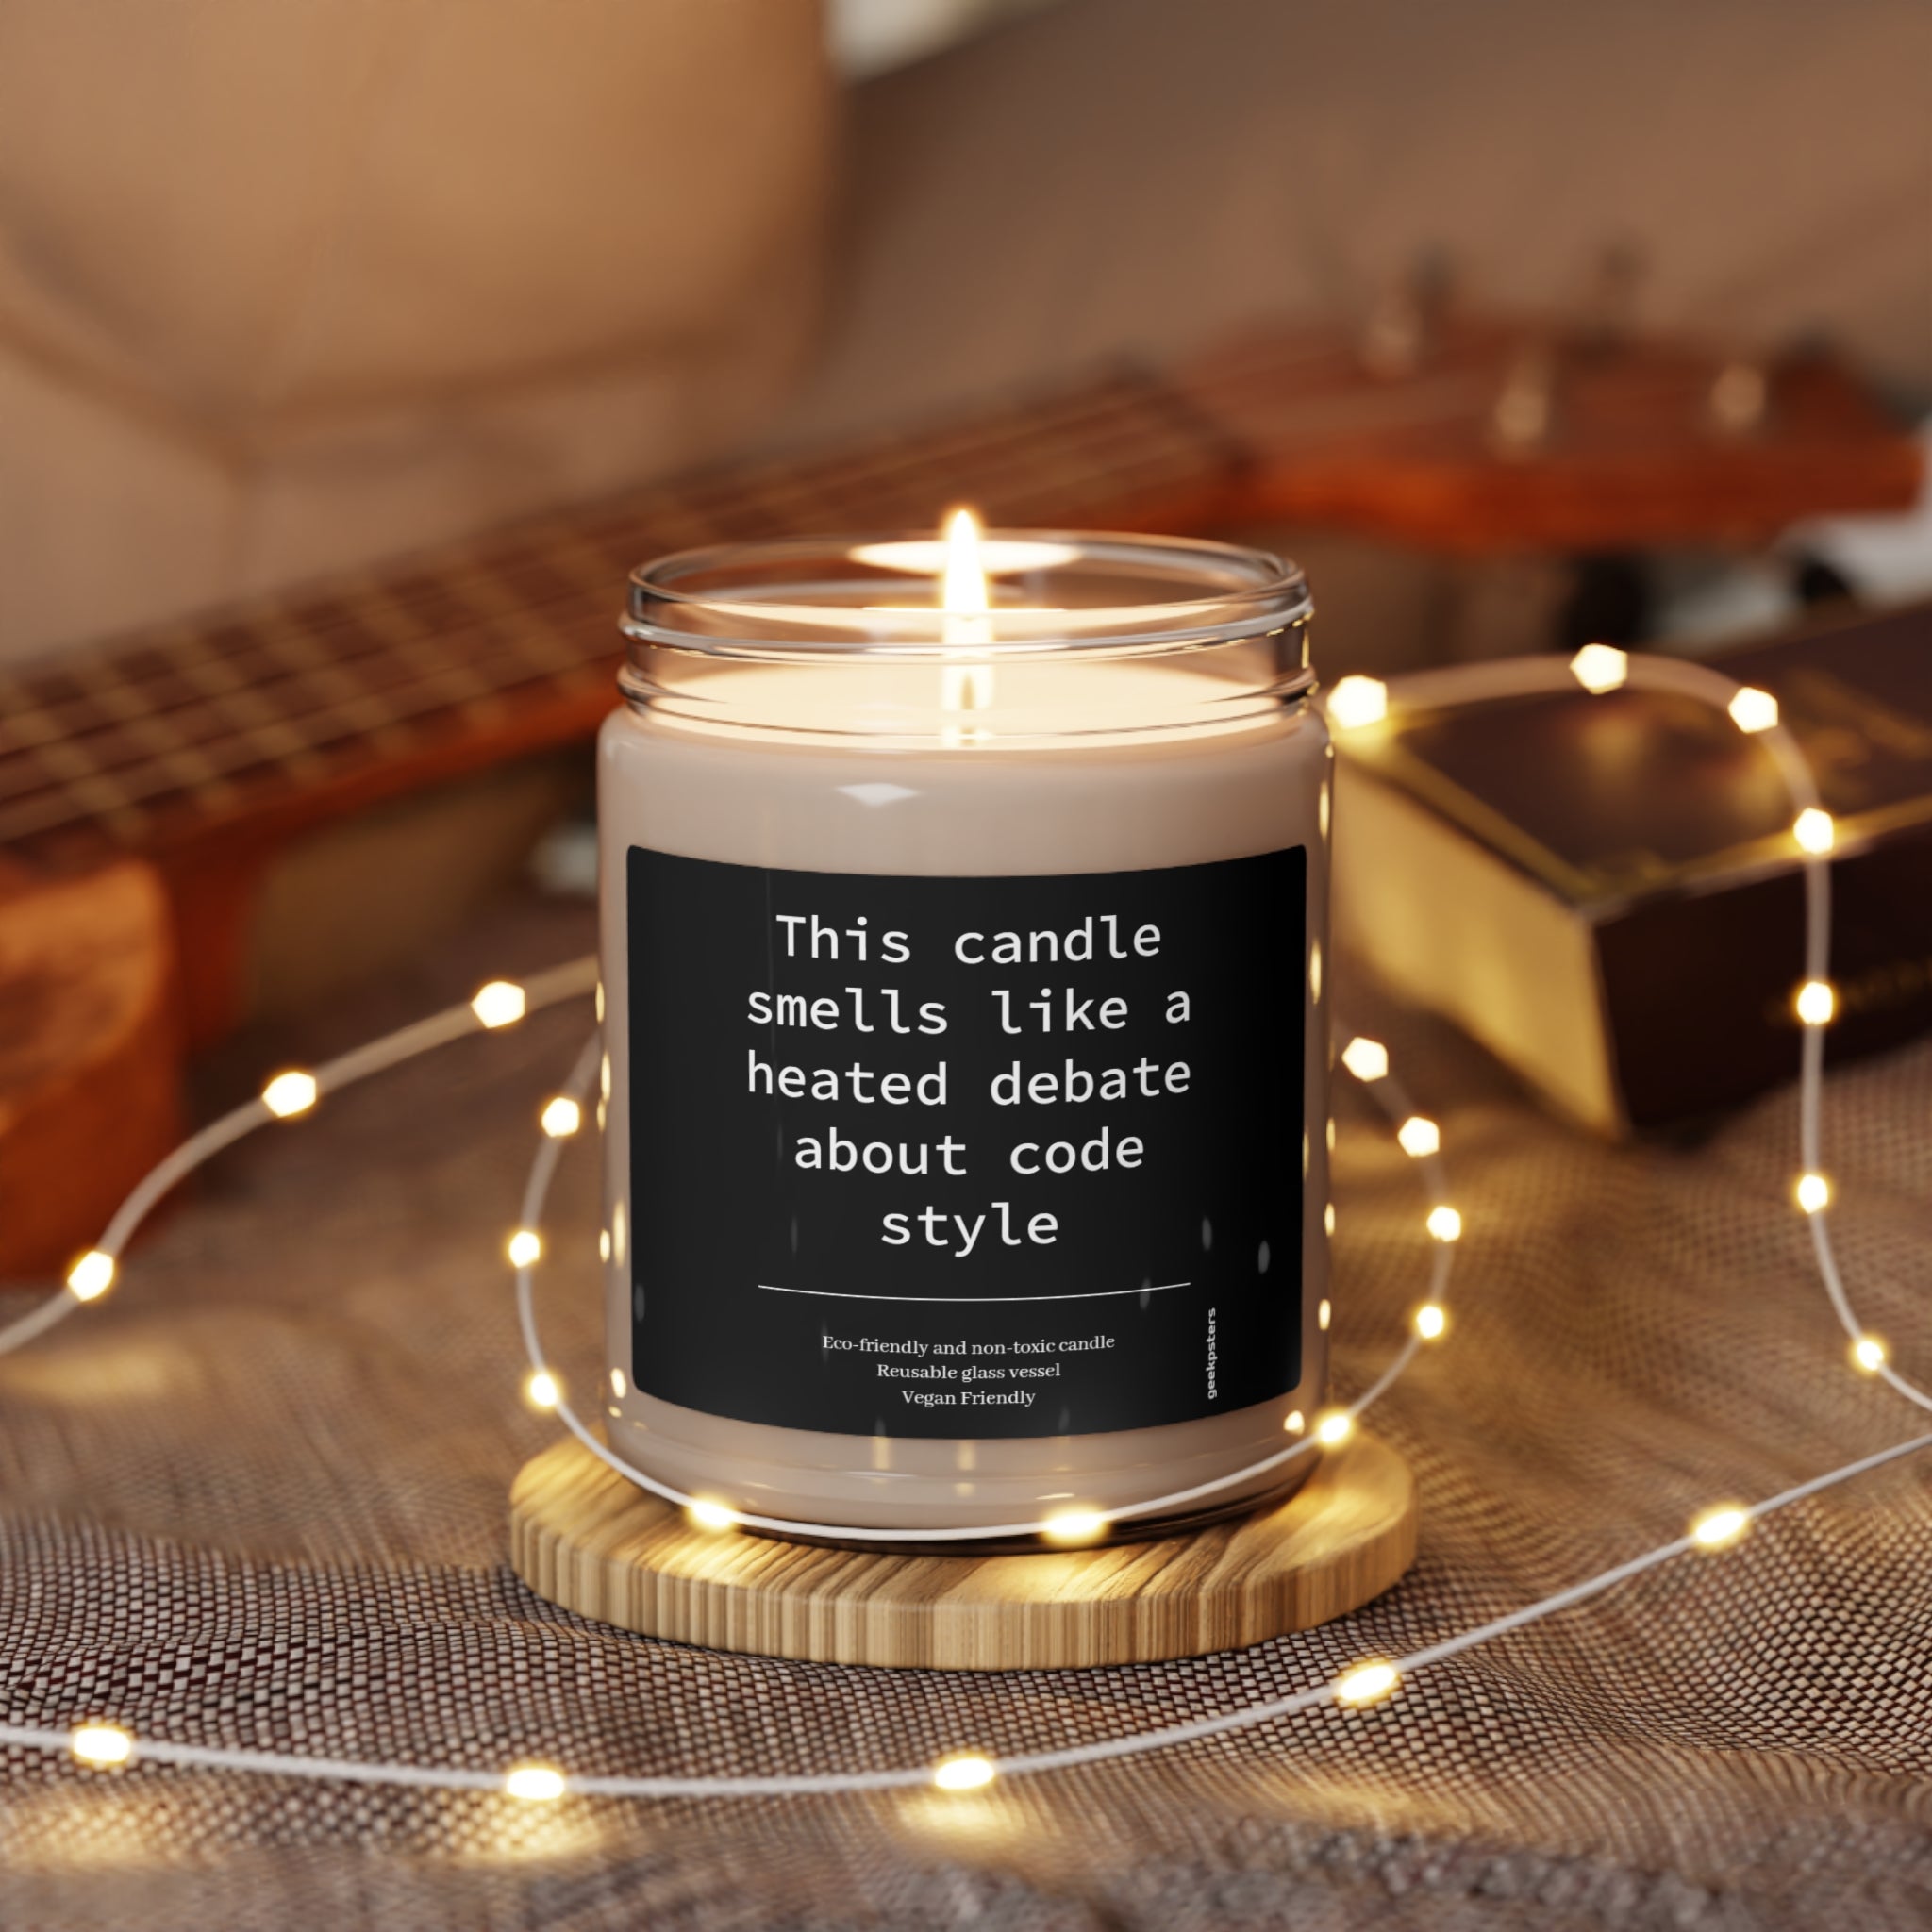 A "This Candle Smells Like a Heated Debate About Code Style- Scented Soy Candle, 9oz" made from a soy wax blend, with a humorous label placed on a table with a soft-focus background.